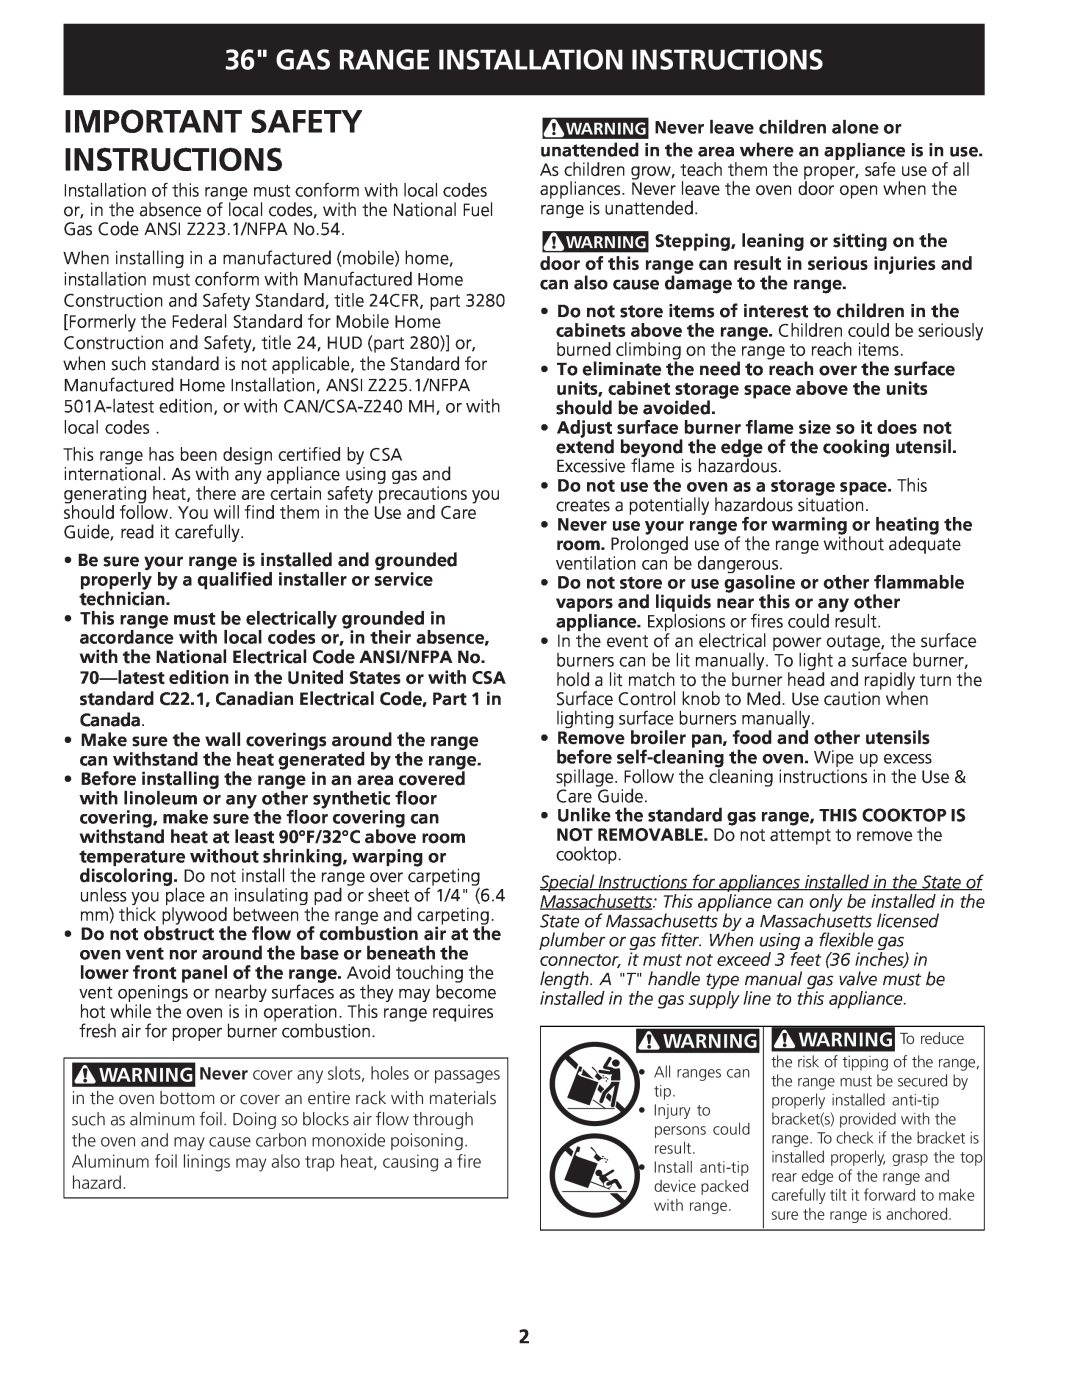 Electrolux 318201778 installation instructions Important Safety Instructions, Gas Range Installation Instructions 